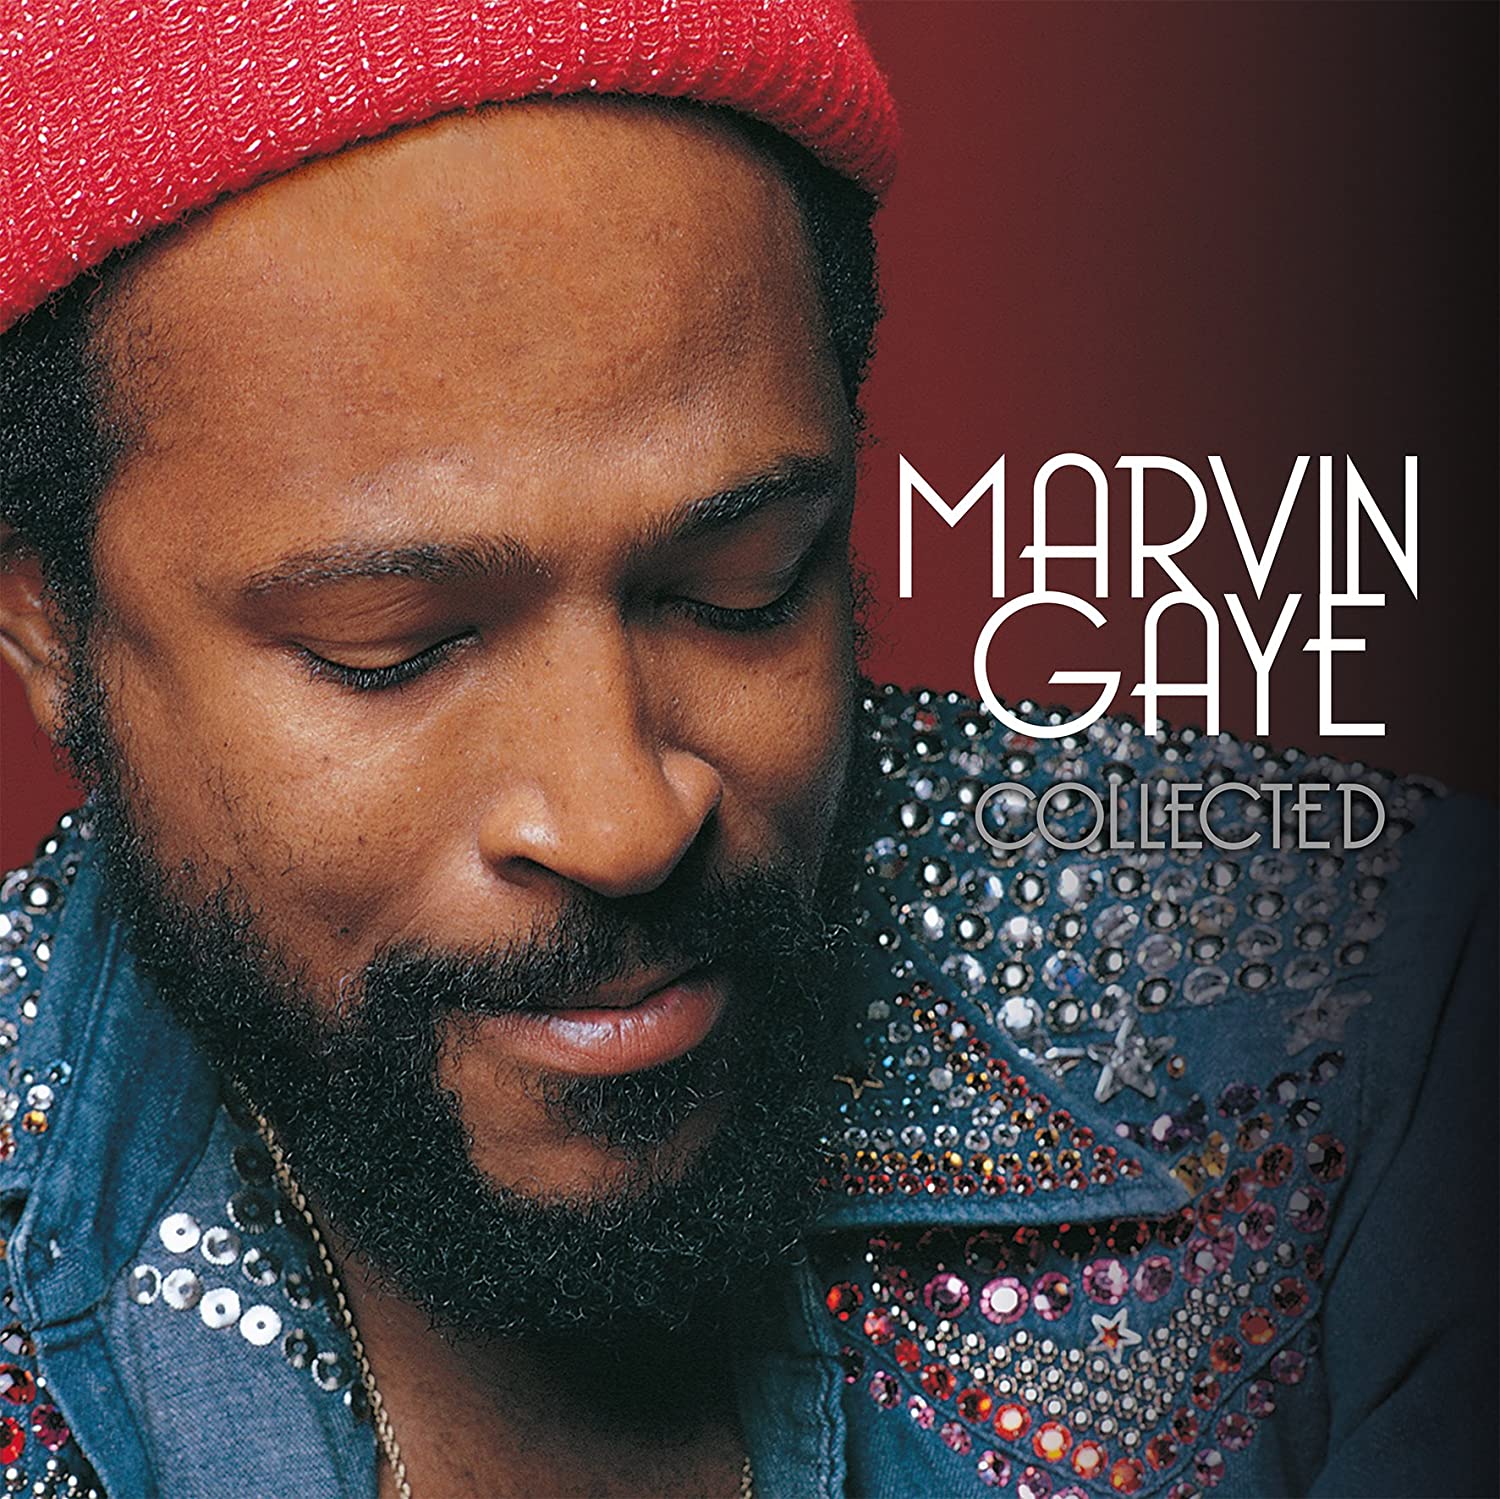 MARVIN GAYE - COLLECTED (2LP)